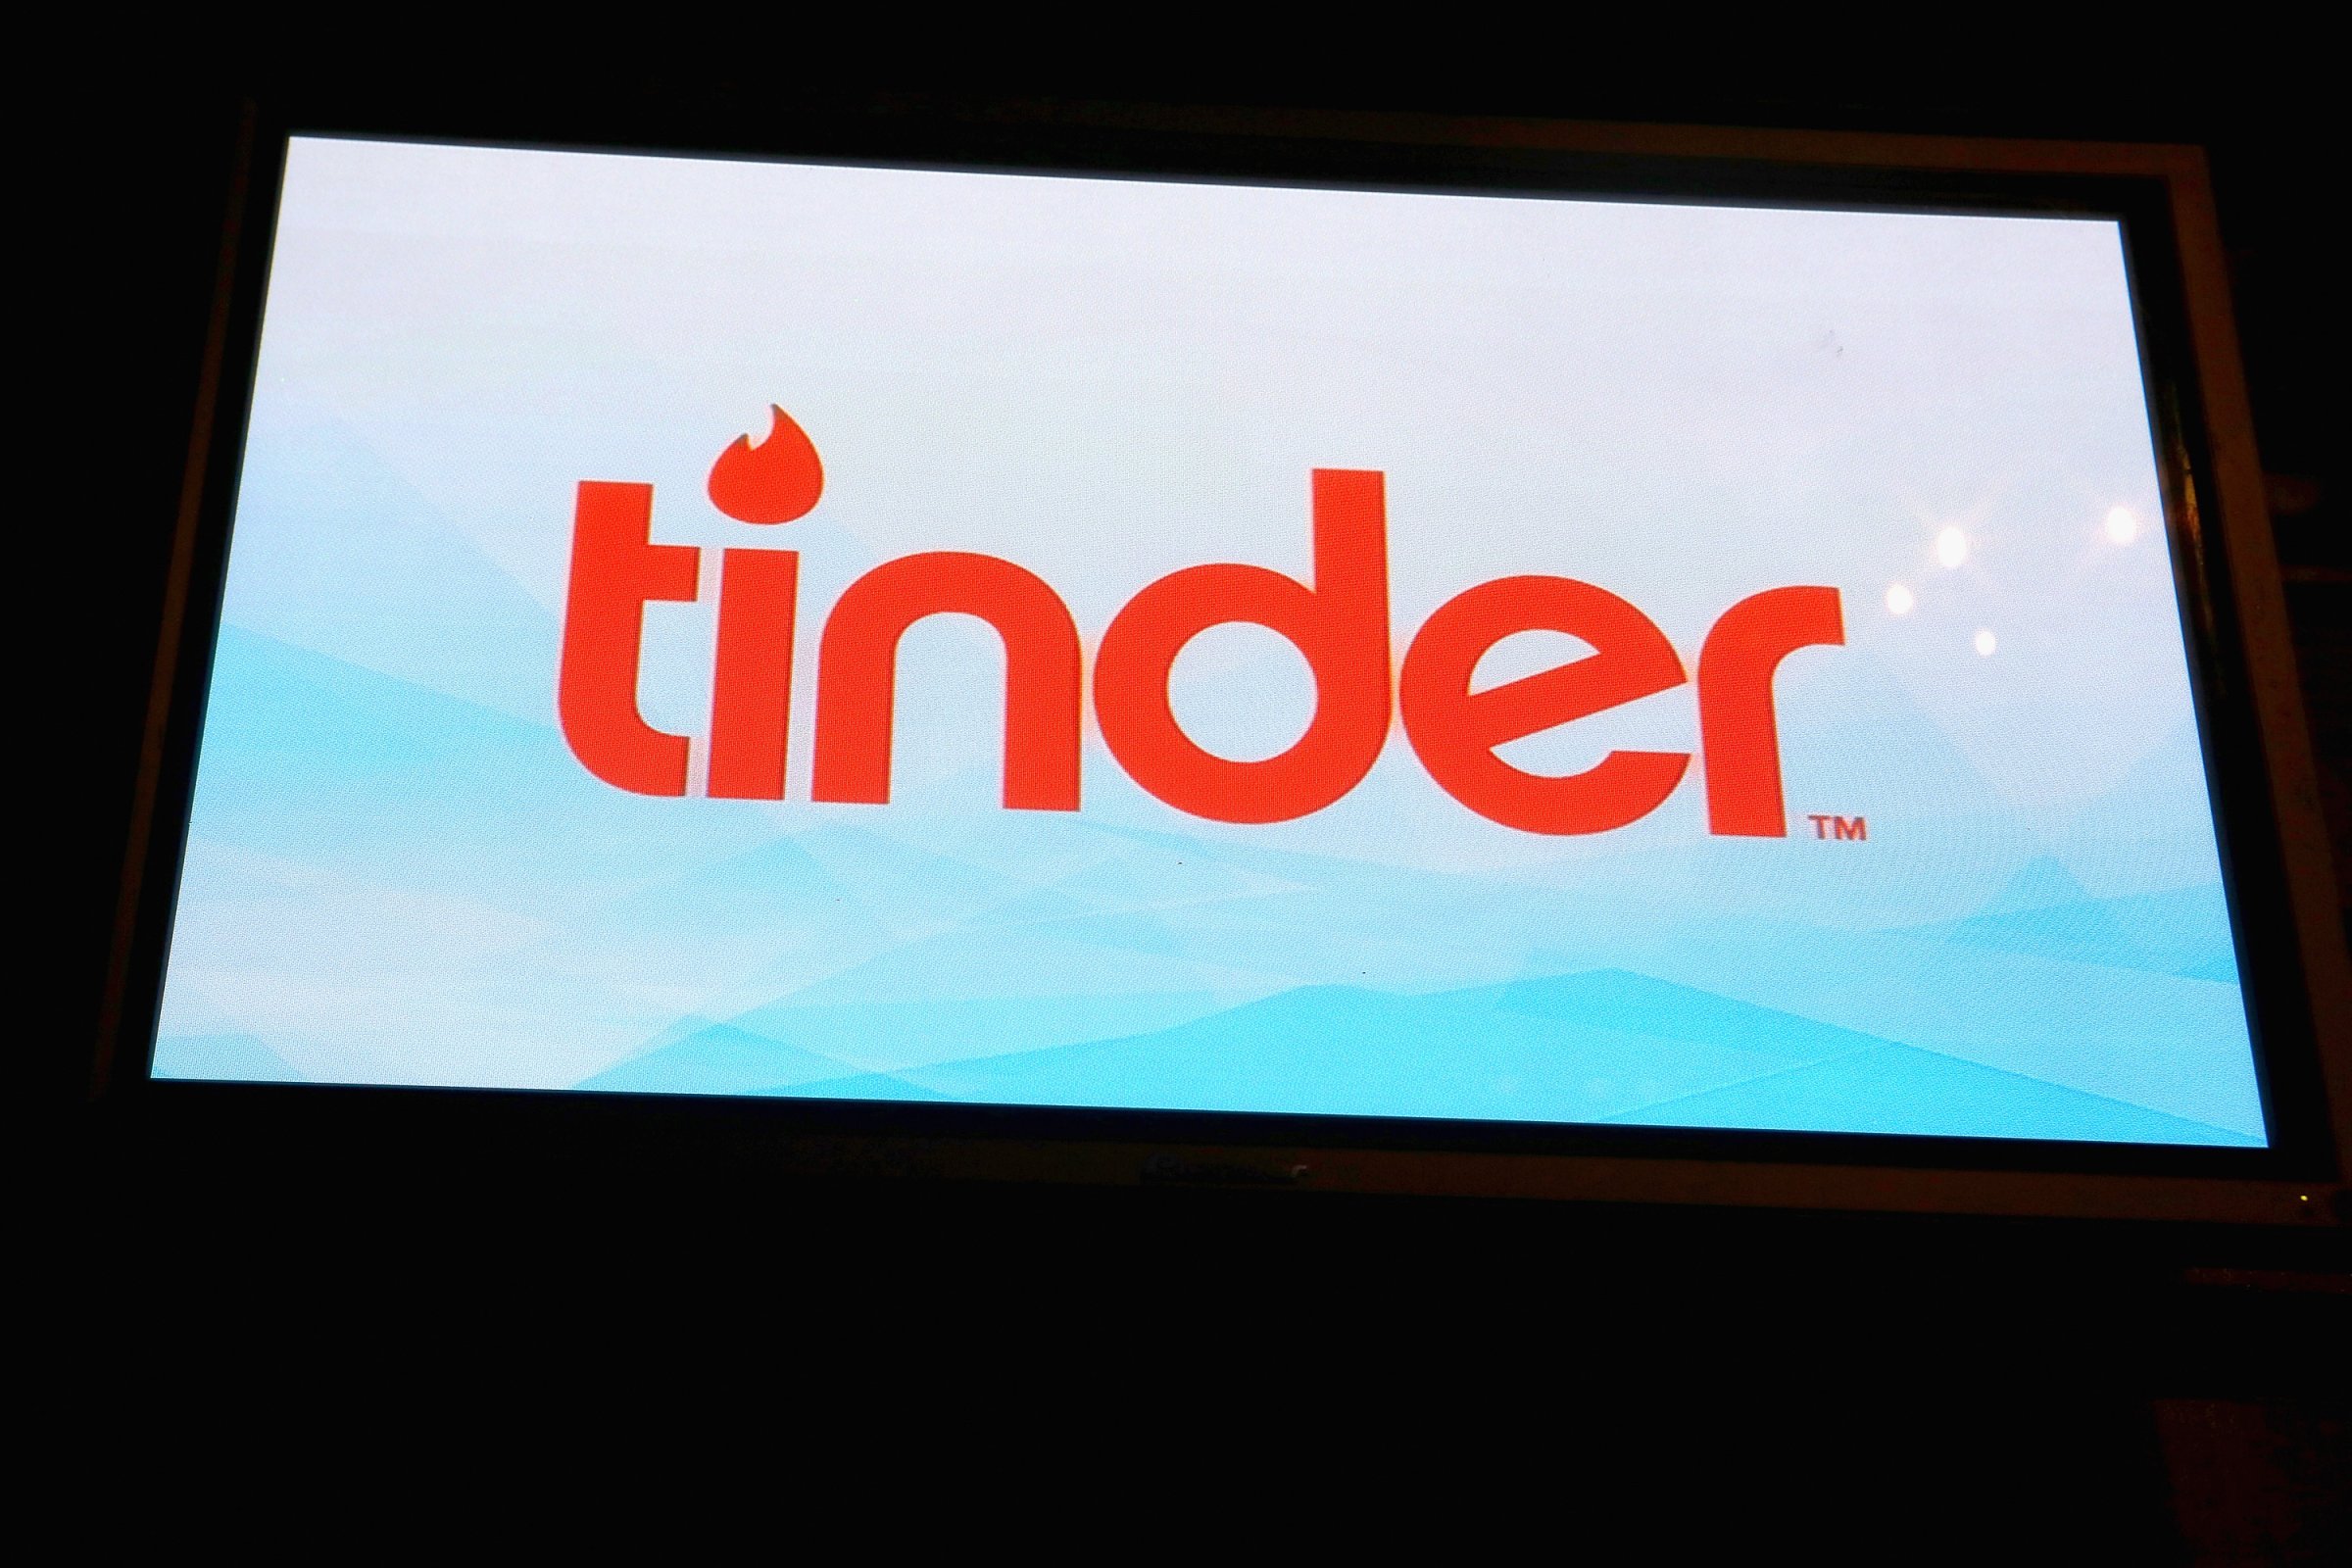 Tinder on display at the Billboard Winterfest at Park City Live! on January 22, 2016 in Park City, Utah.